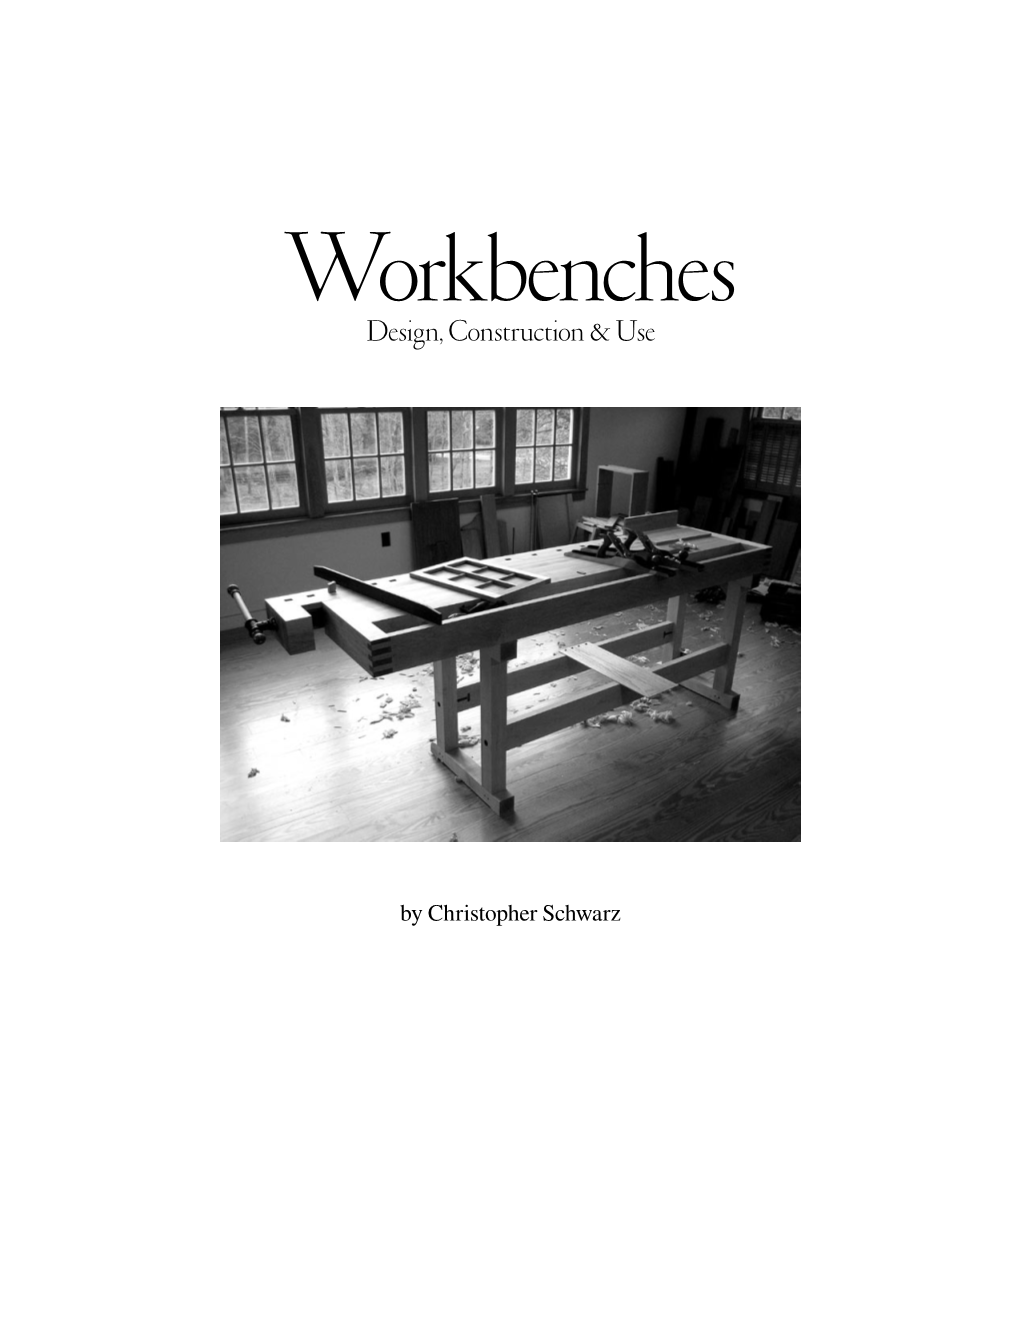 Workbenches Design, Construction & Use